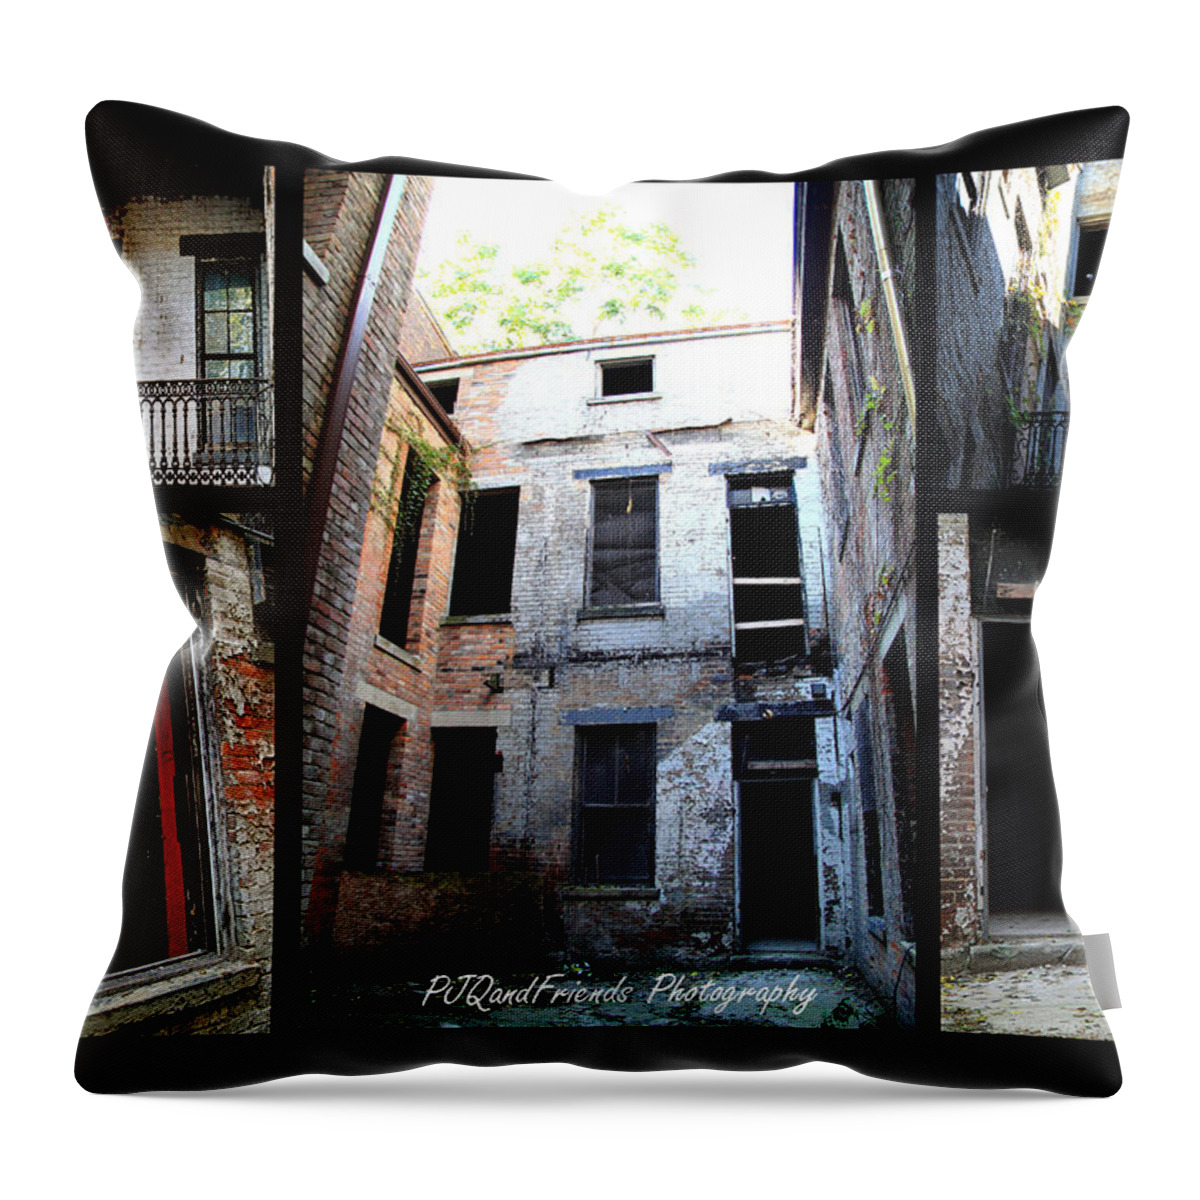 City Walk - Over-the-rhine Throw Pillow featuring the photograph City Walk - Over-the-Rhine #3 by PJQandFriends Photography